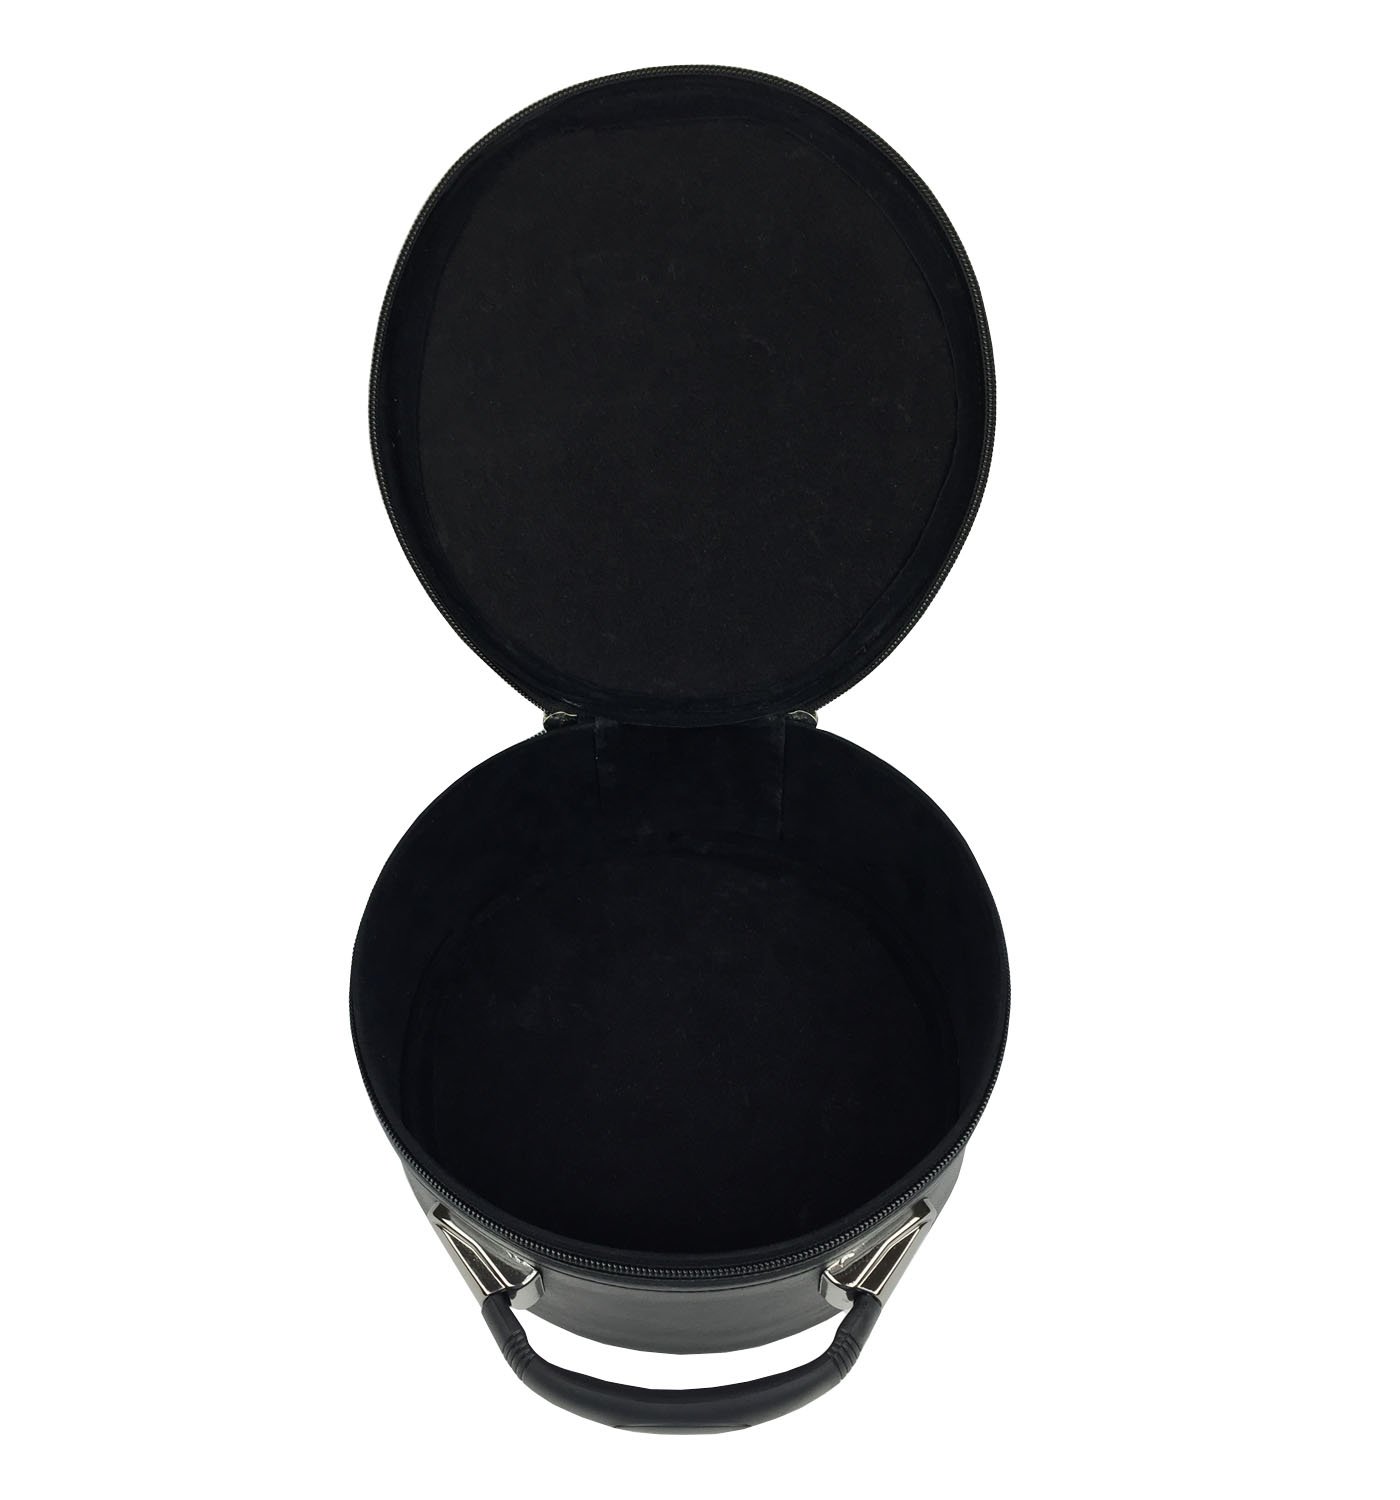 New Scottish Rite Cap Case In Black without Emblem 